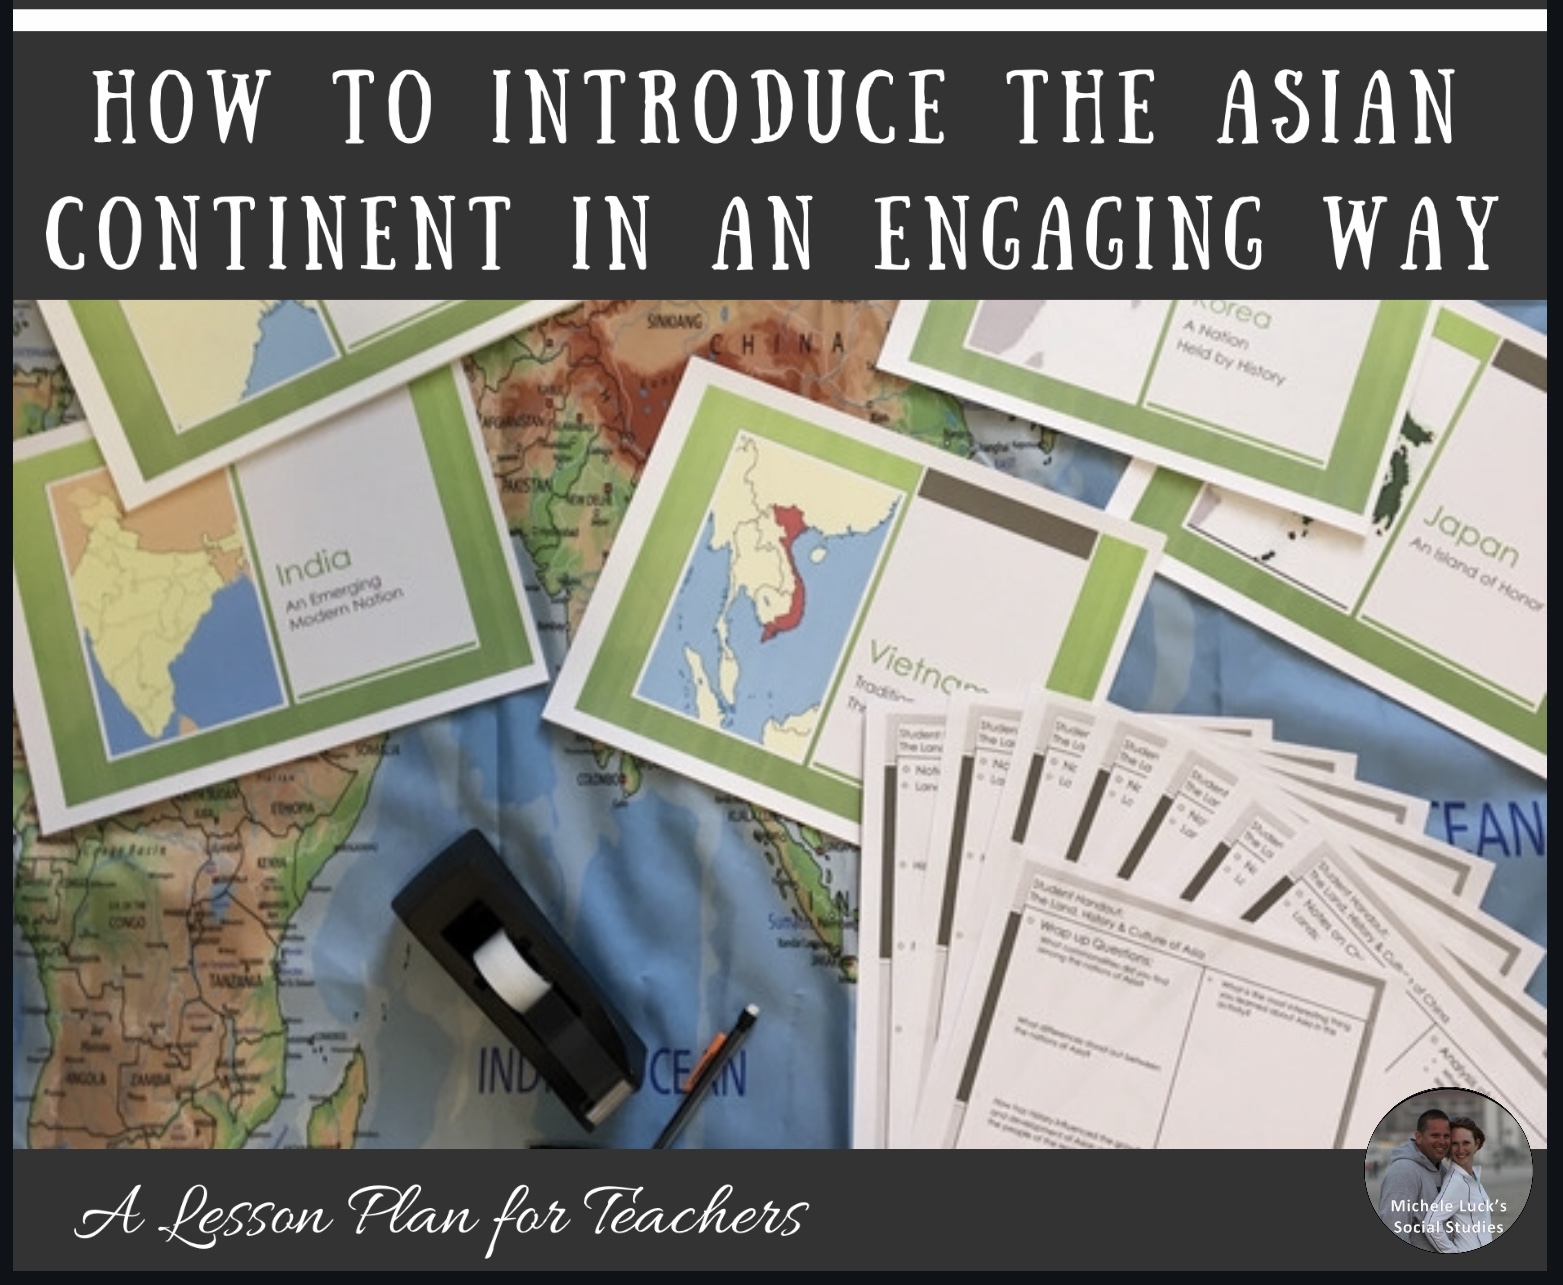 "Class, meet Asia." Well, that was easy, wasn't it? But introducing your students to the Asian continent requires a bit more than a simple introduction. In fact, easing into a unit on Asia can be overwhelming as students may have trouble relating to those on a completely different continent. But it doesn't have to be a dreaded transition! Introducing the Asian continent in an engaging way will spark students to seek knowledge, approach the lessons with curiosity, and begin to draw conclusions about the continent all while skipping over that overwhelmed resistance to learn new things. #asia #lessonplanning #teachinghighschool #teachingmiddleschool #teachaboutasia #learnaboutasia